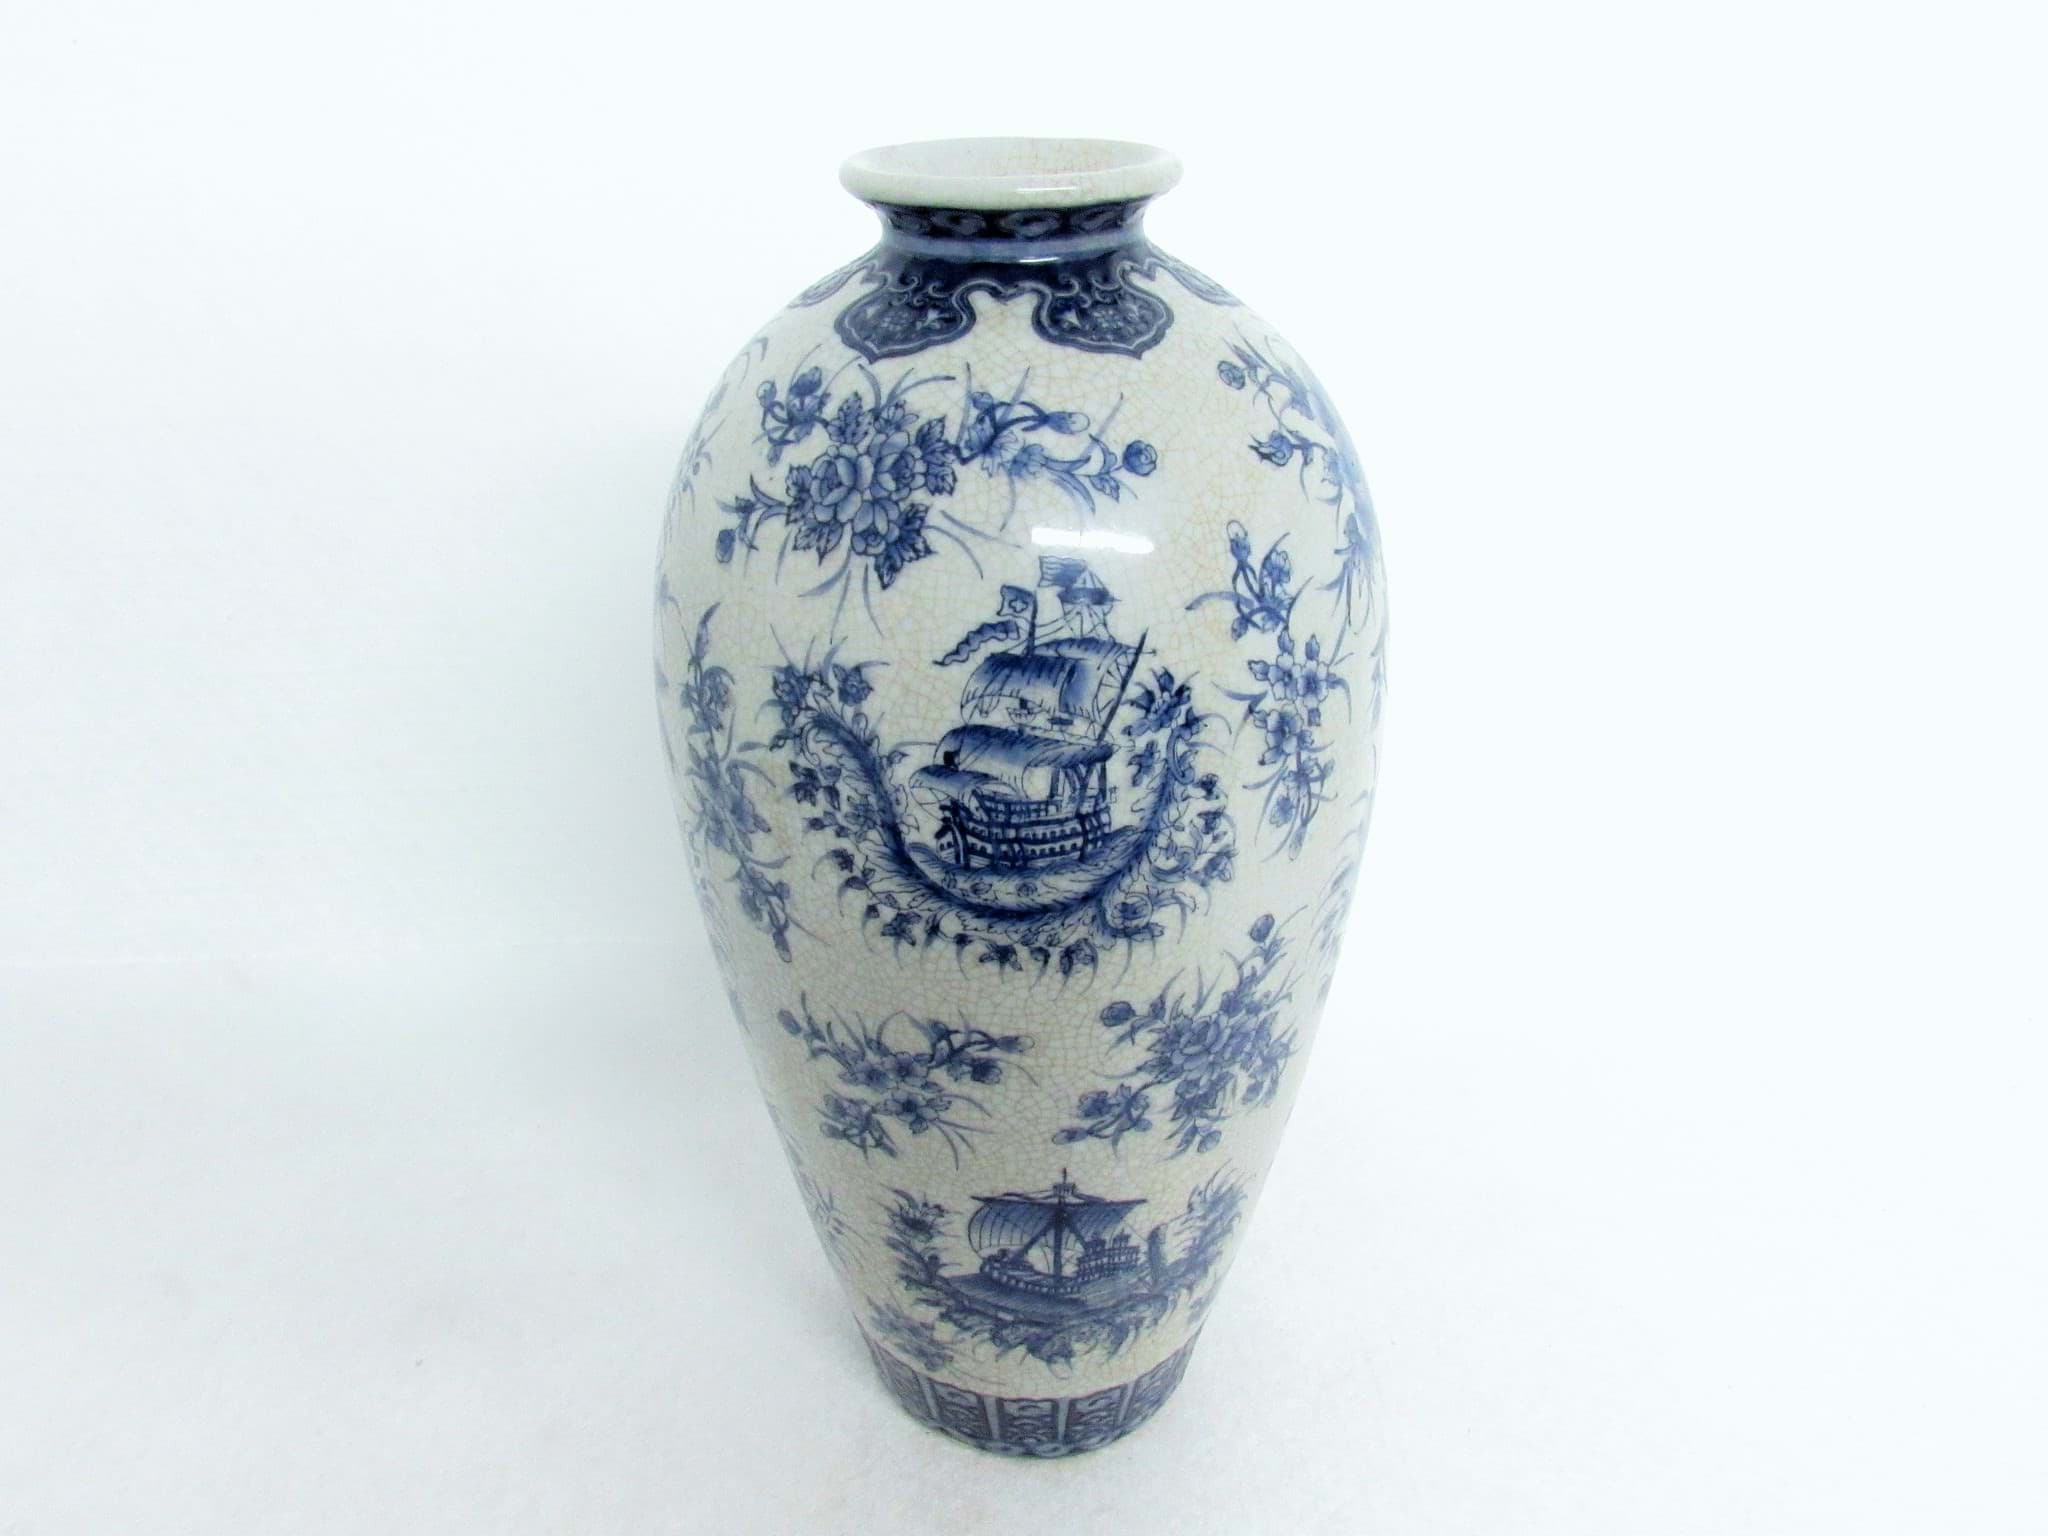 Picture of Asiatische Vase Meiping-Form, 20. Jahrhundert, wohl China